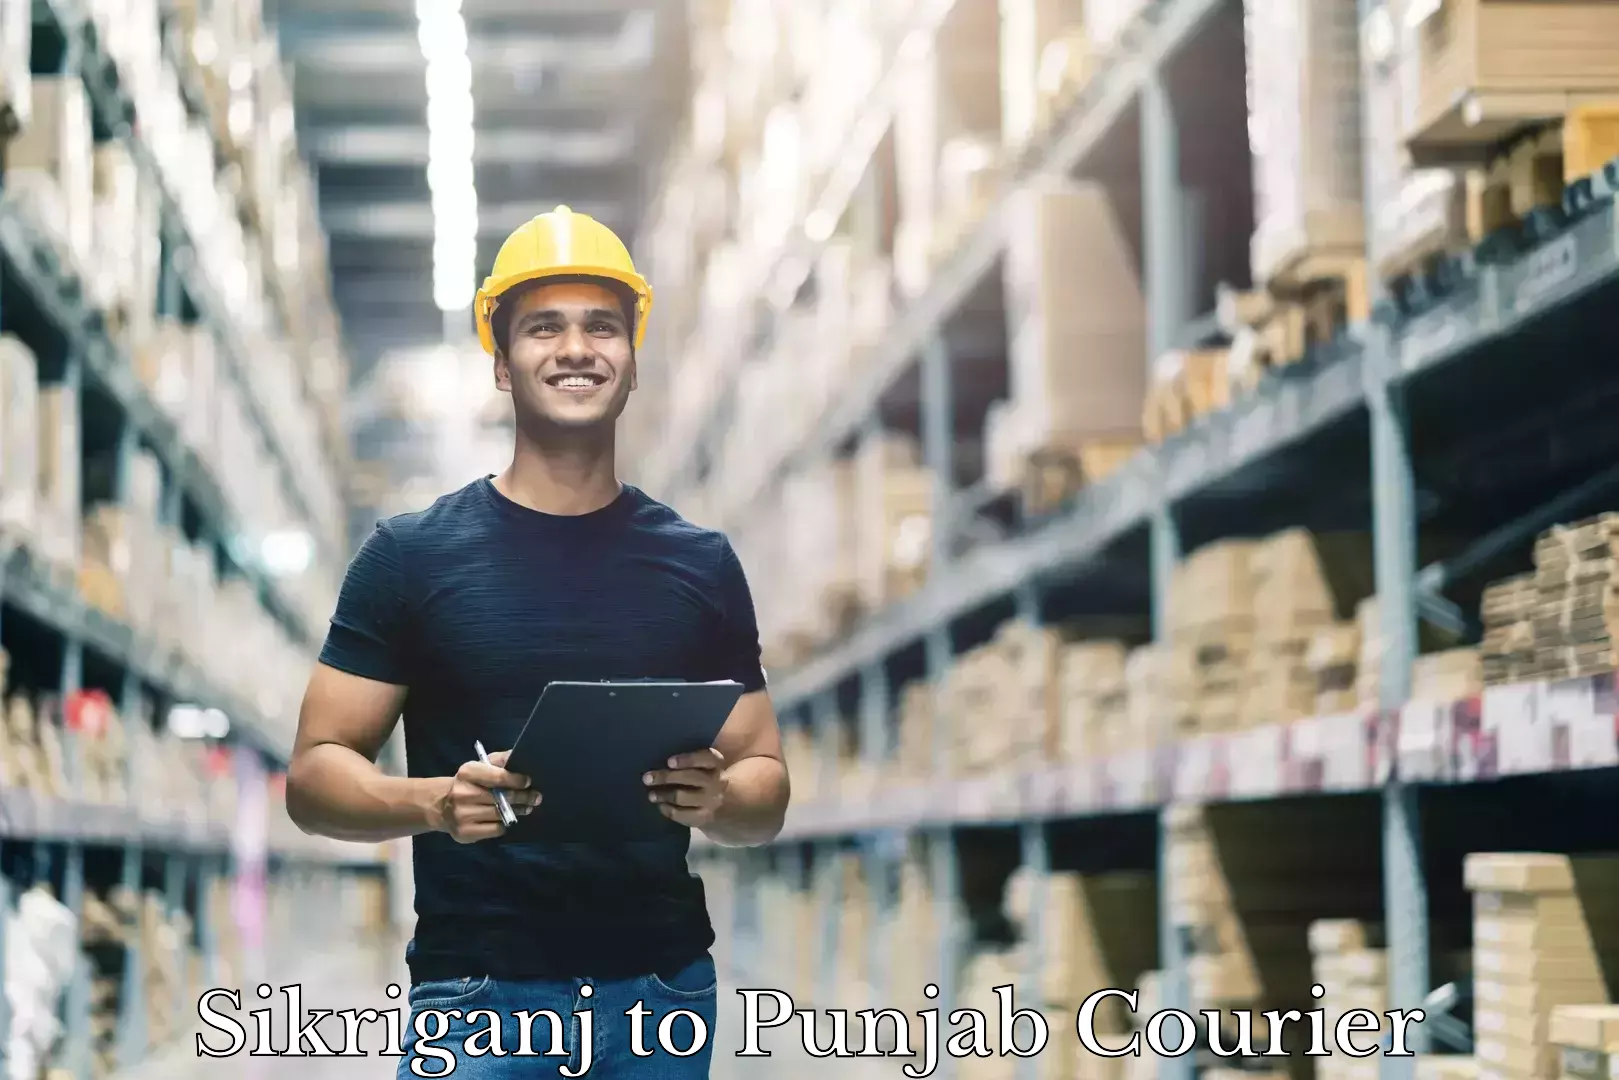 Furniture moving experts in Sikriganj to Ludhiana